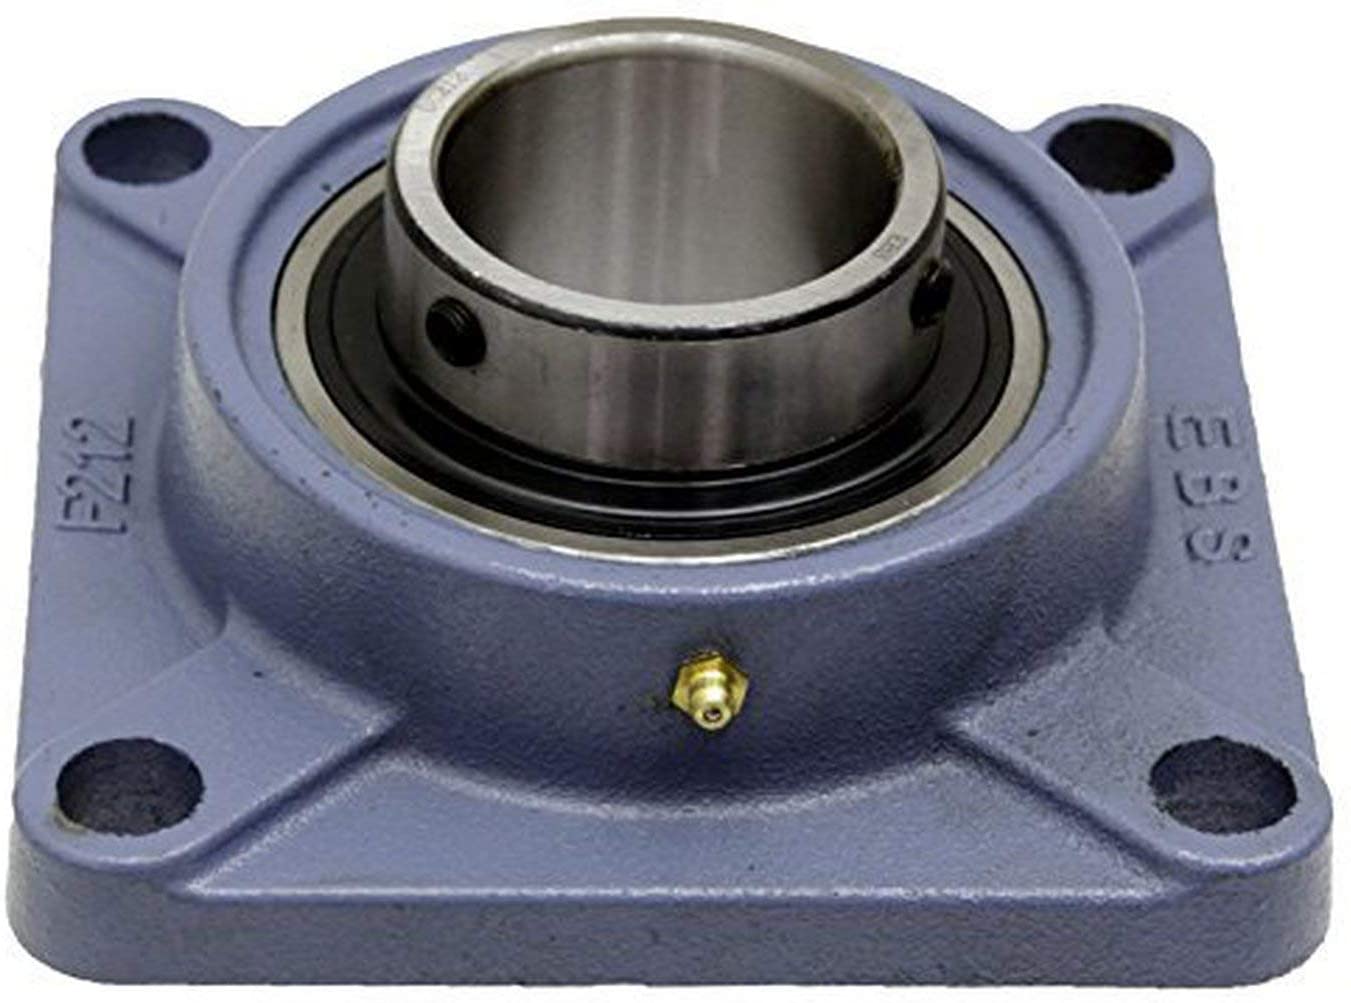 UCF205-16  GENERIC Normal duty 4 bolt cast iron flange self-lube housed unit - Imperial Thumbnail